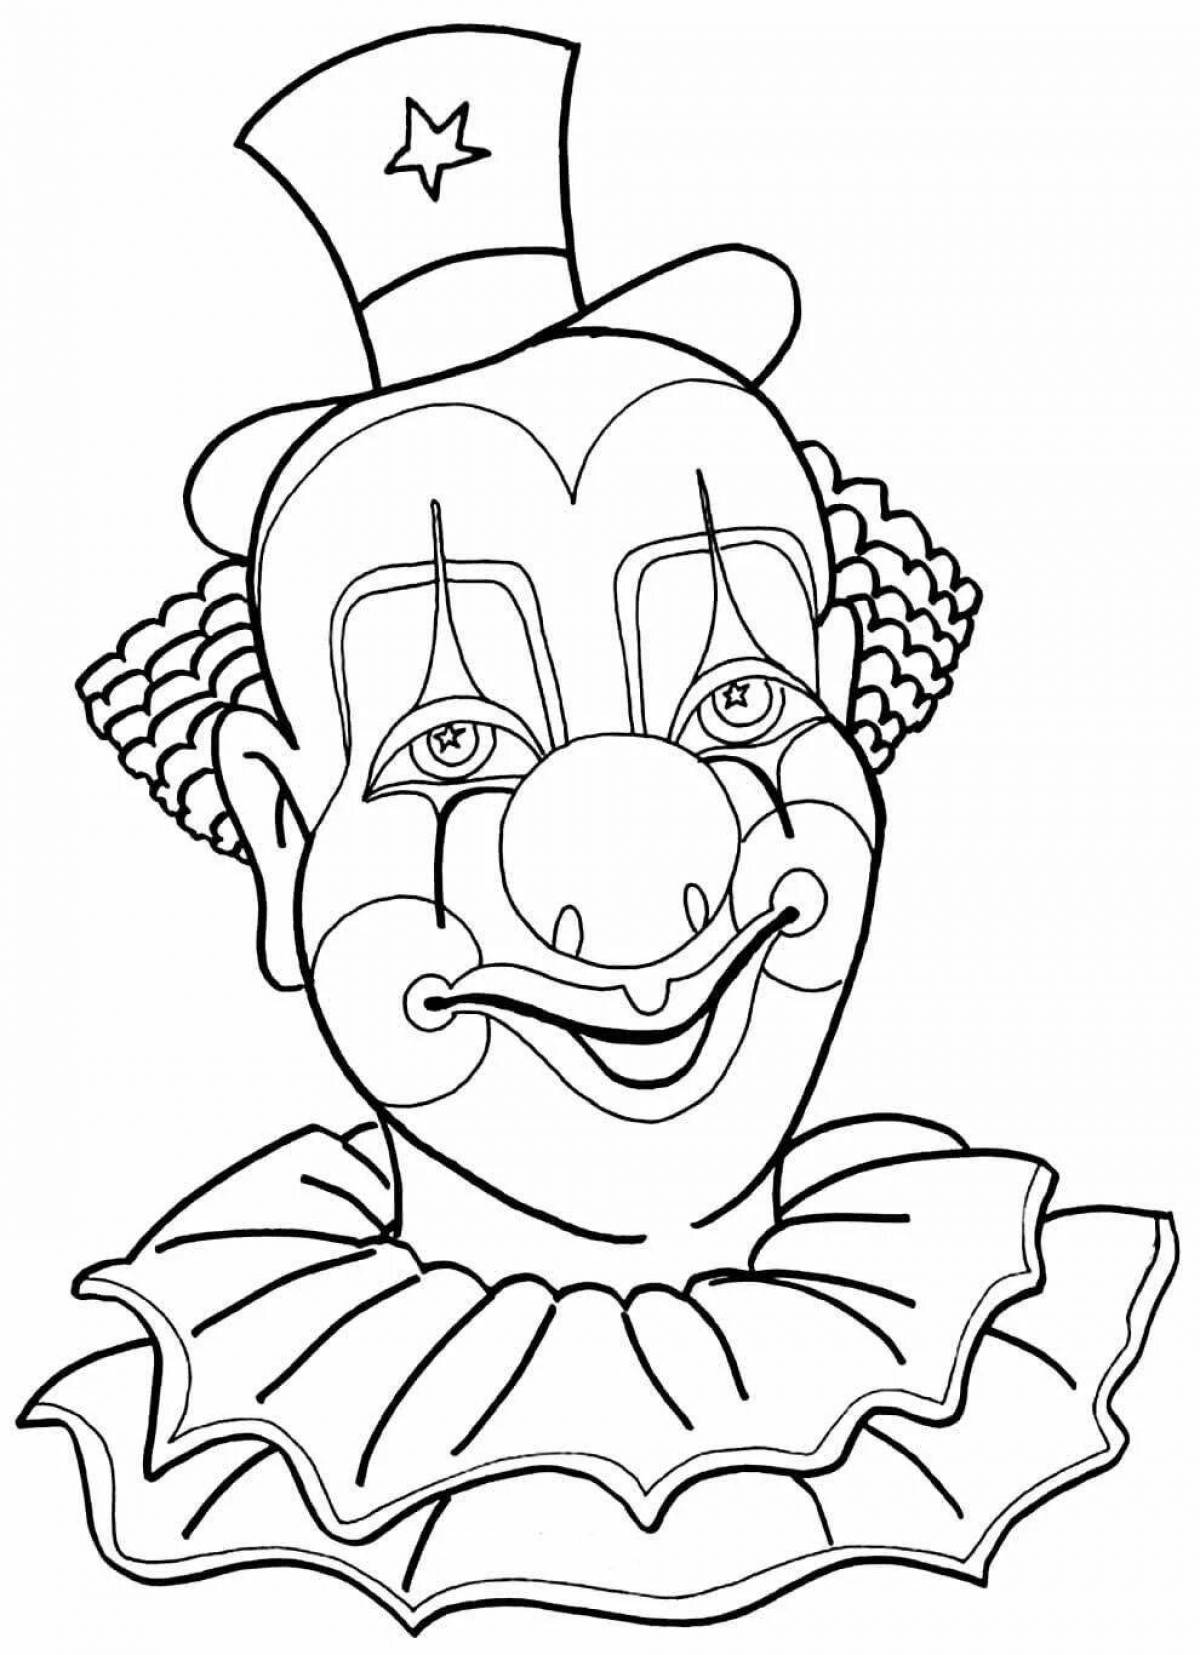 Attractive clown mask coloring book